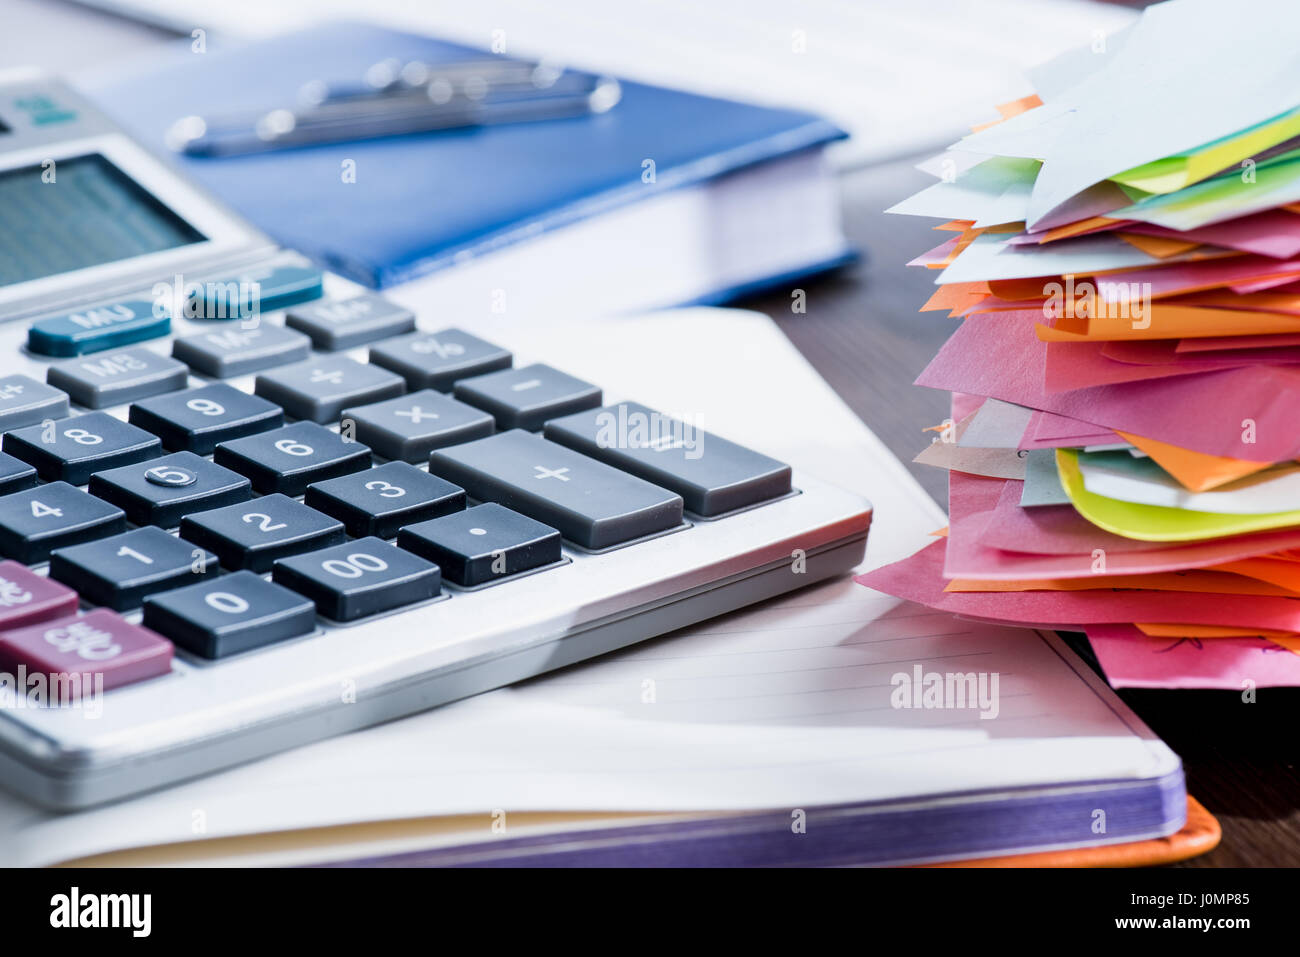 Close-up view of calculator, notebook and office supplies at workplace Stock Photo